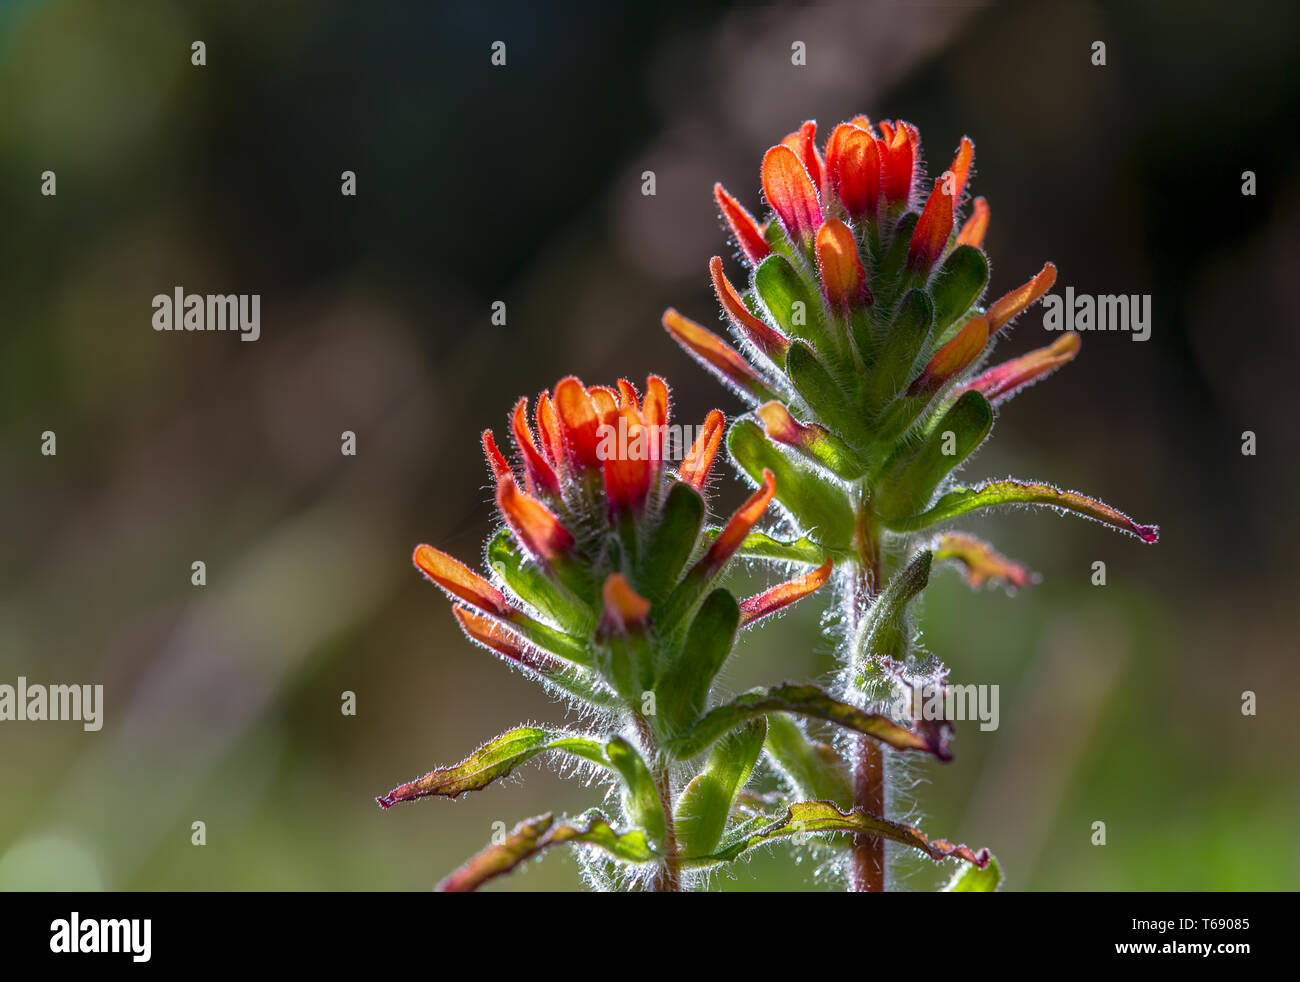 The exotic beauty of two scarlet Indian paintbrush flowers captured in a macro photography at the Andean mountains of Colombia. Stock Photo